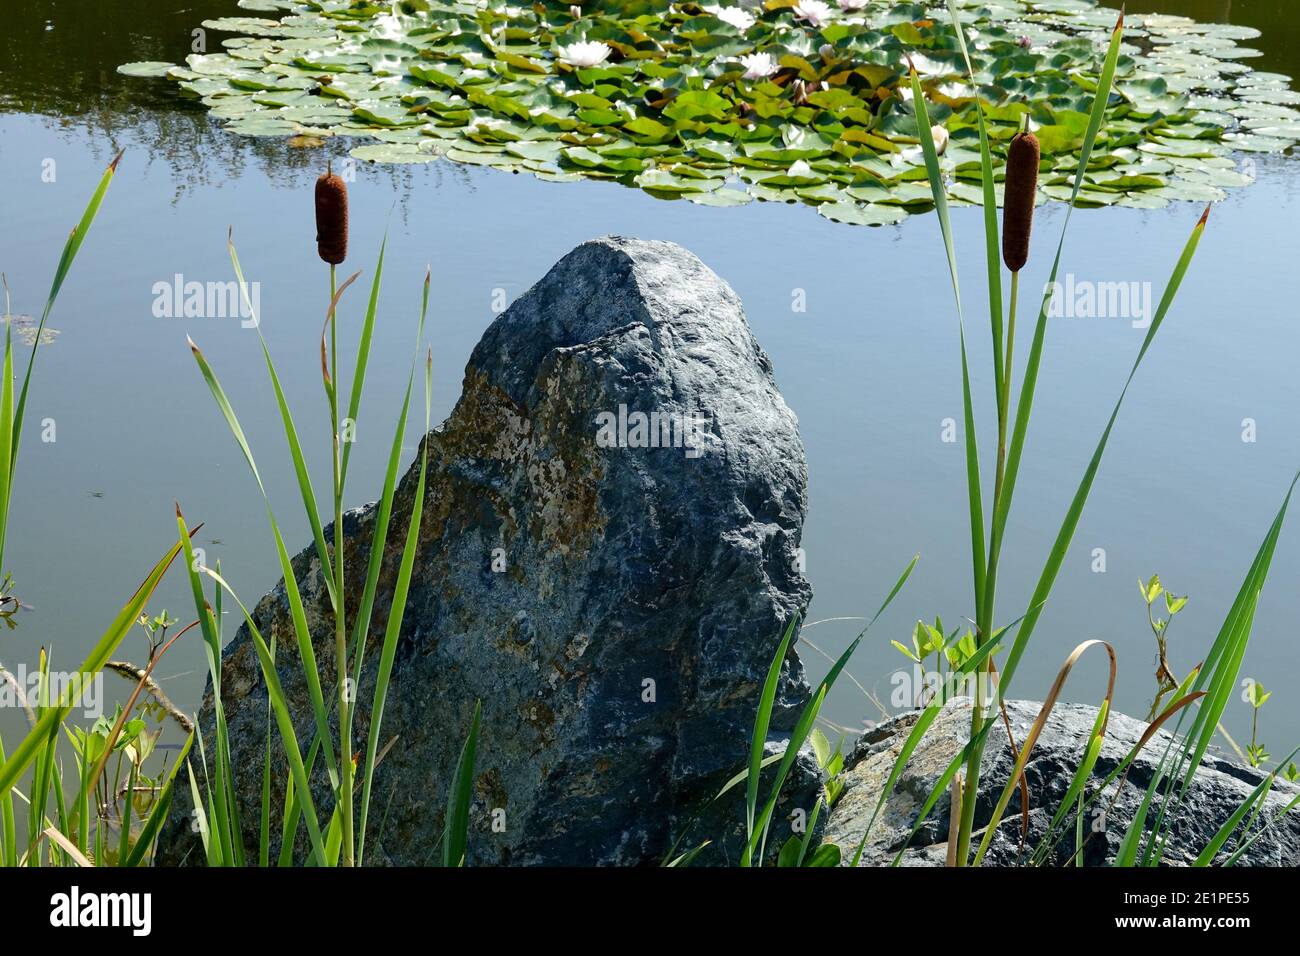 Stone at garden pond, scenery with bullrush Typha Stock Photo